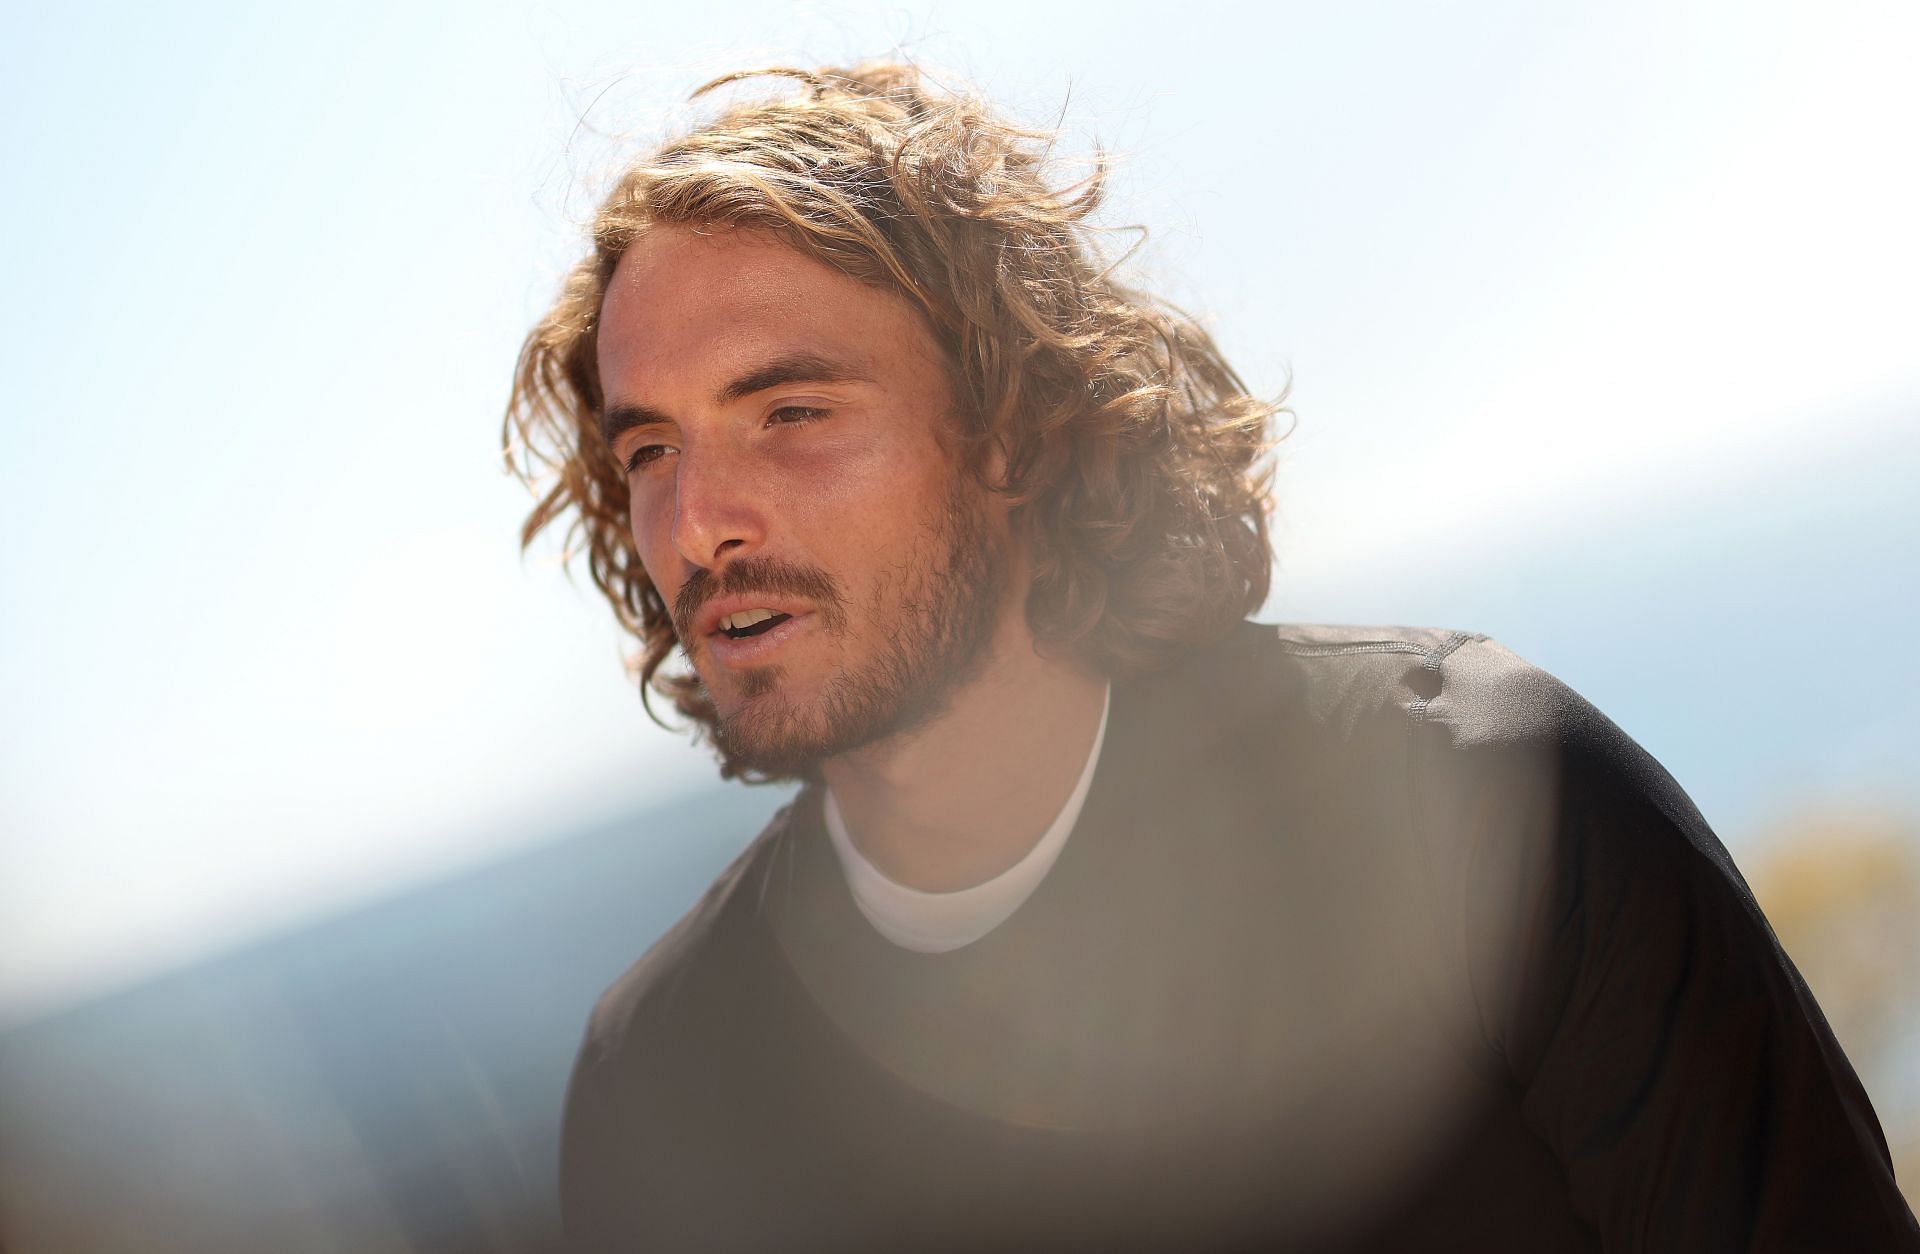 Stefanos Tsitsipas is the defending champion at the Rolex Monte-Carlo Masters